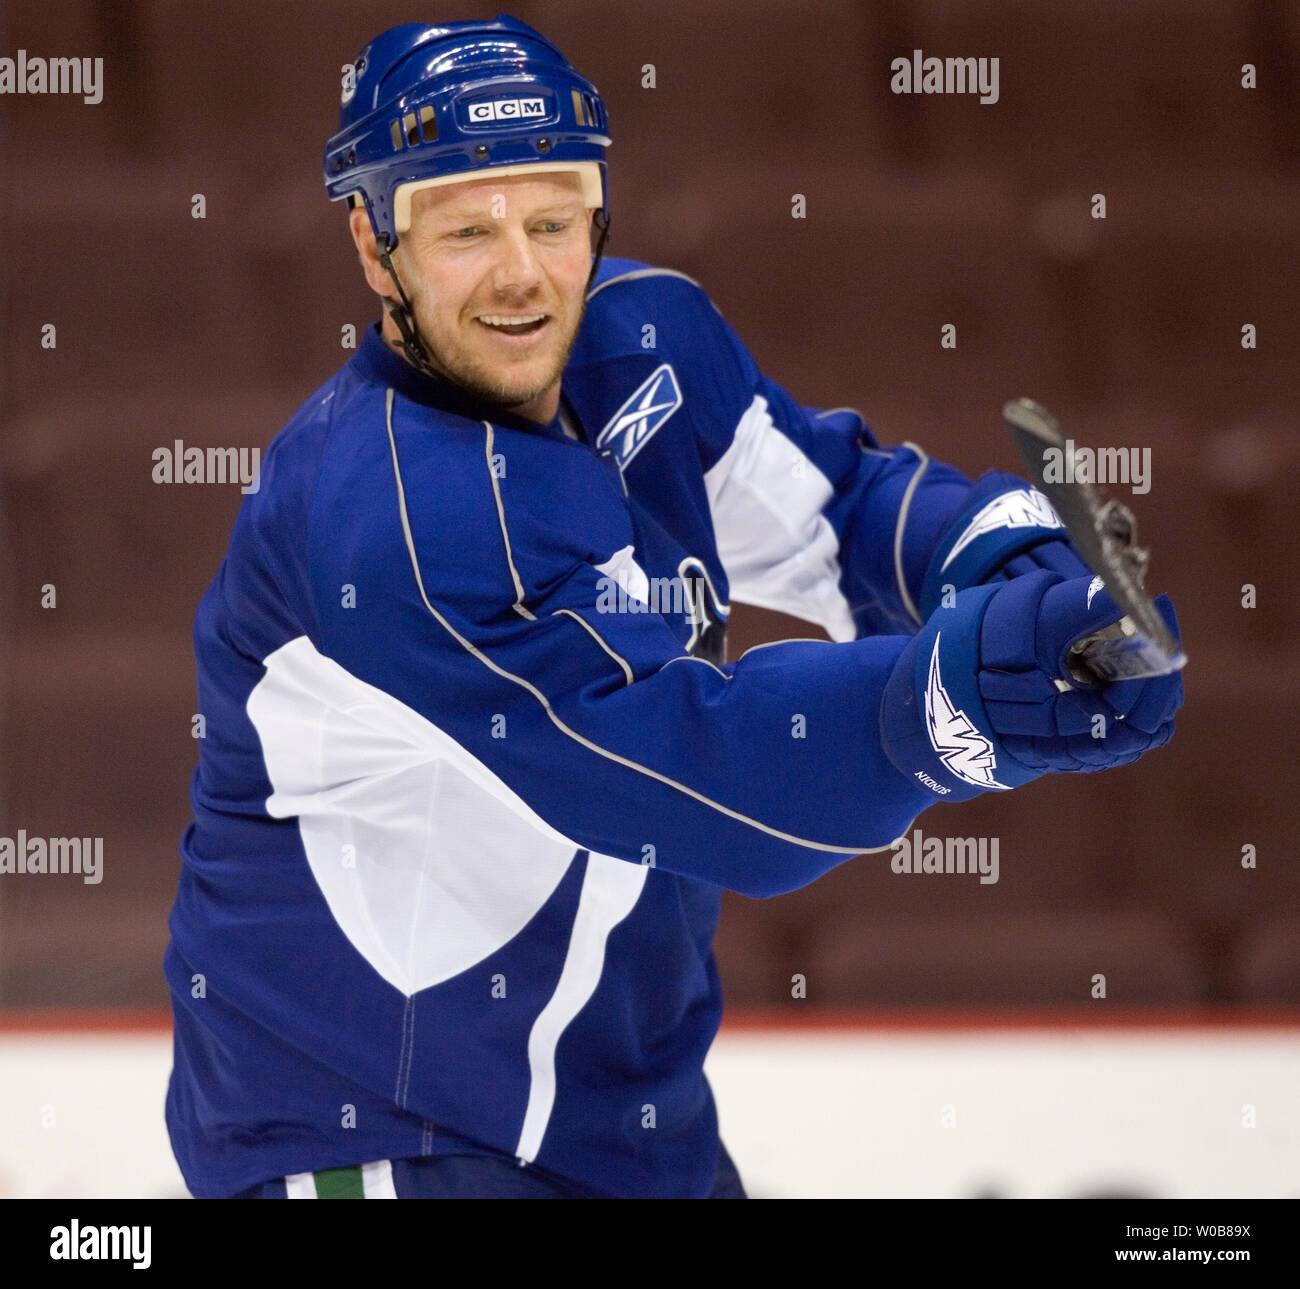 3,813 Mats Sundin Photos & High Res Pictures - Getty Images